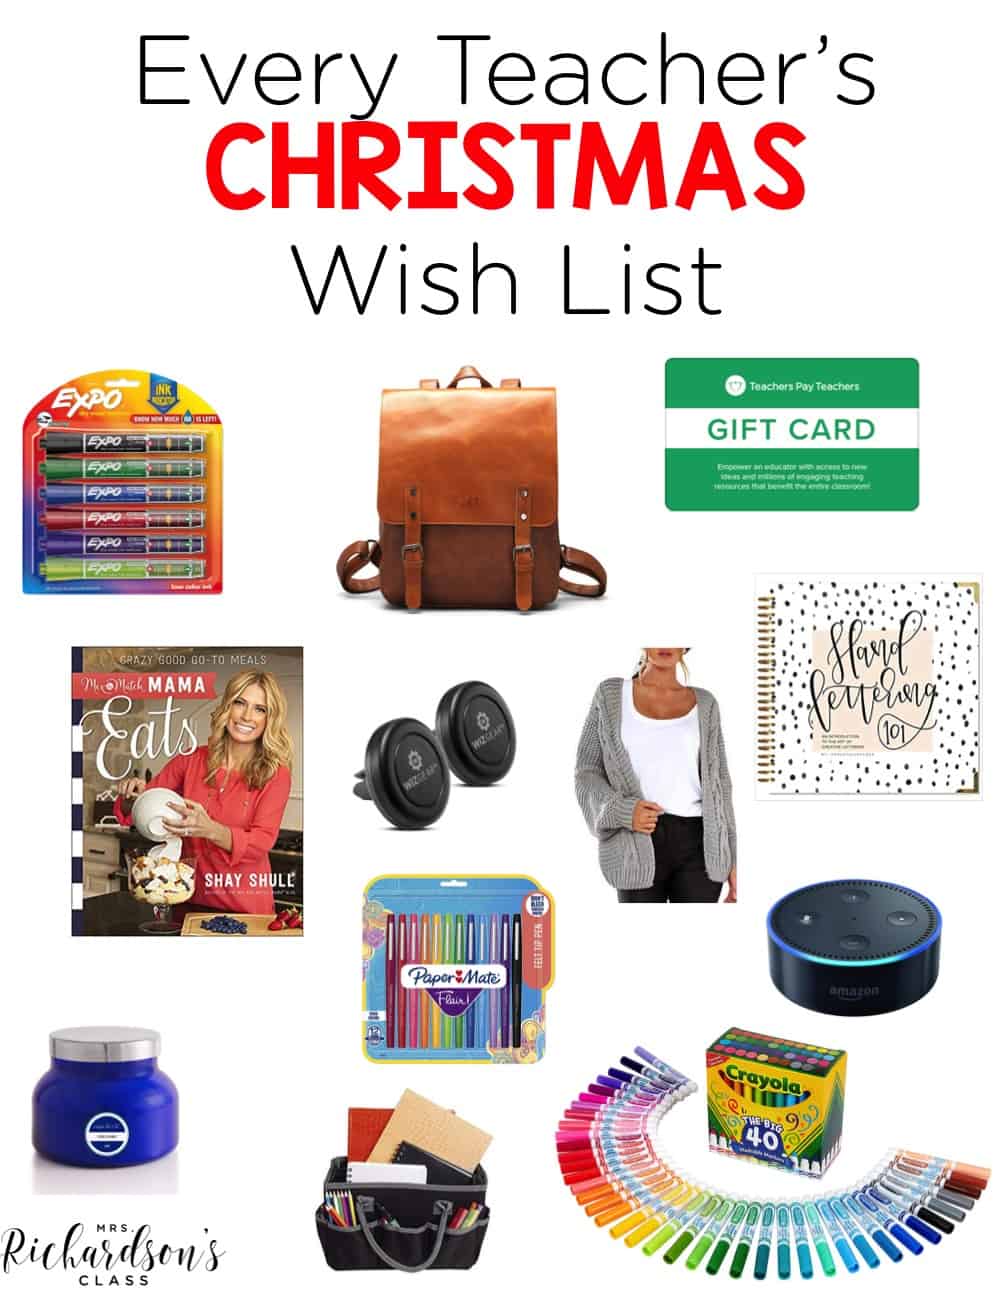 Are you ready to make your wish list for the holiday season? Here are some of my favorites both in and out of the classroom as a teacher! These 12 things make fabulous teacher gifts!